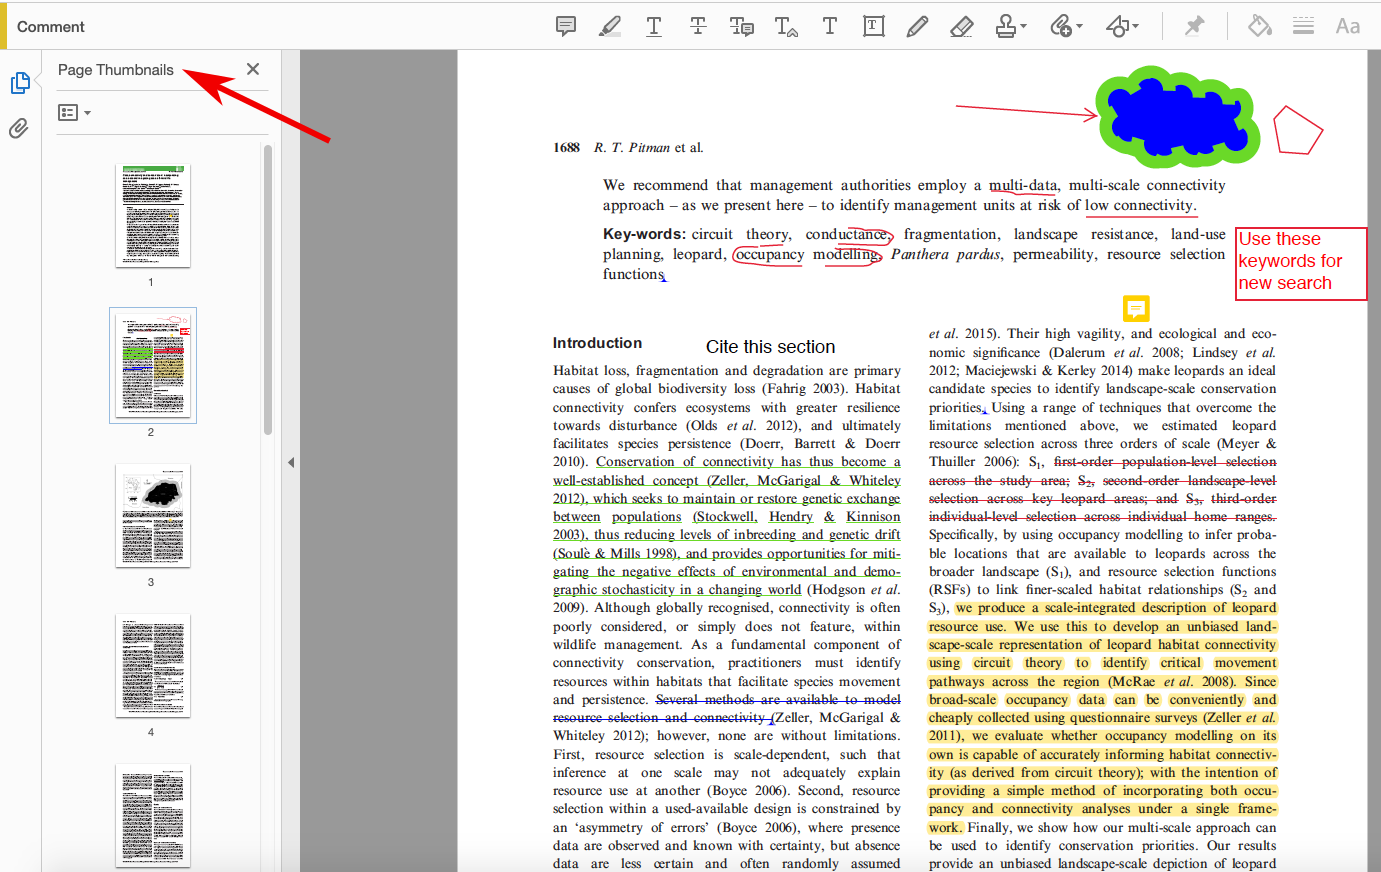 This is a screenshot of the same PDF document. On the left side of the page, a bar is open with small images of each page in the document. A small title that reads "Page Thumbnails" at the top of this bar has a red arrow pointing to it. To the left of the title, a small logo showing two pieces of paper is highlighted in blue.